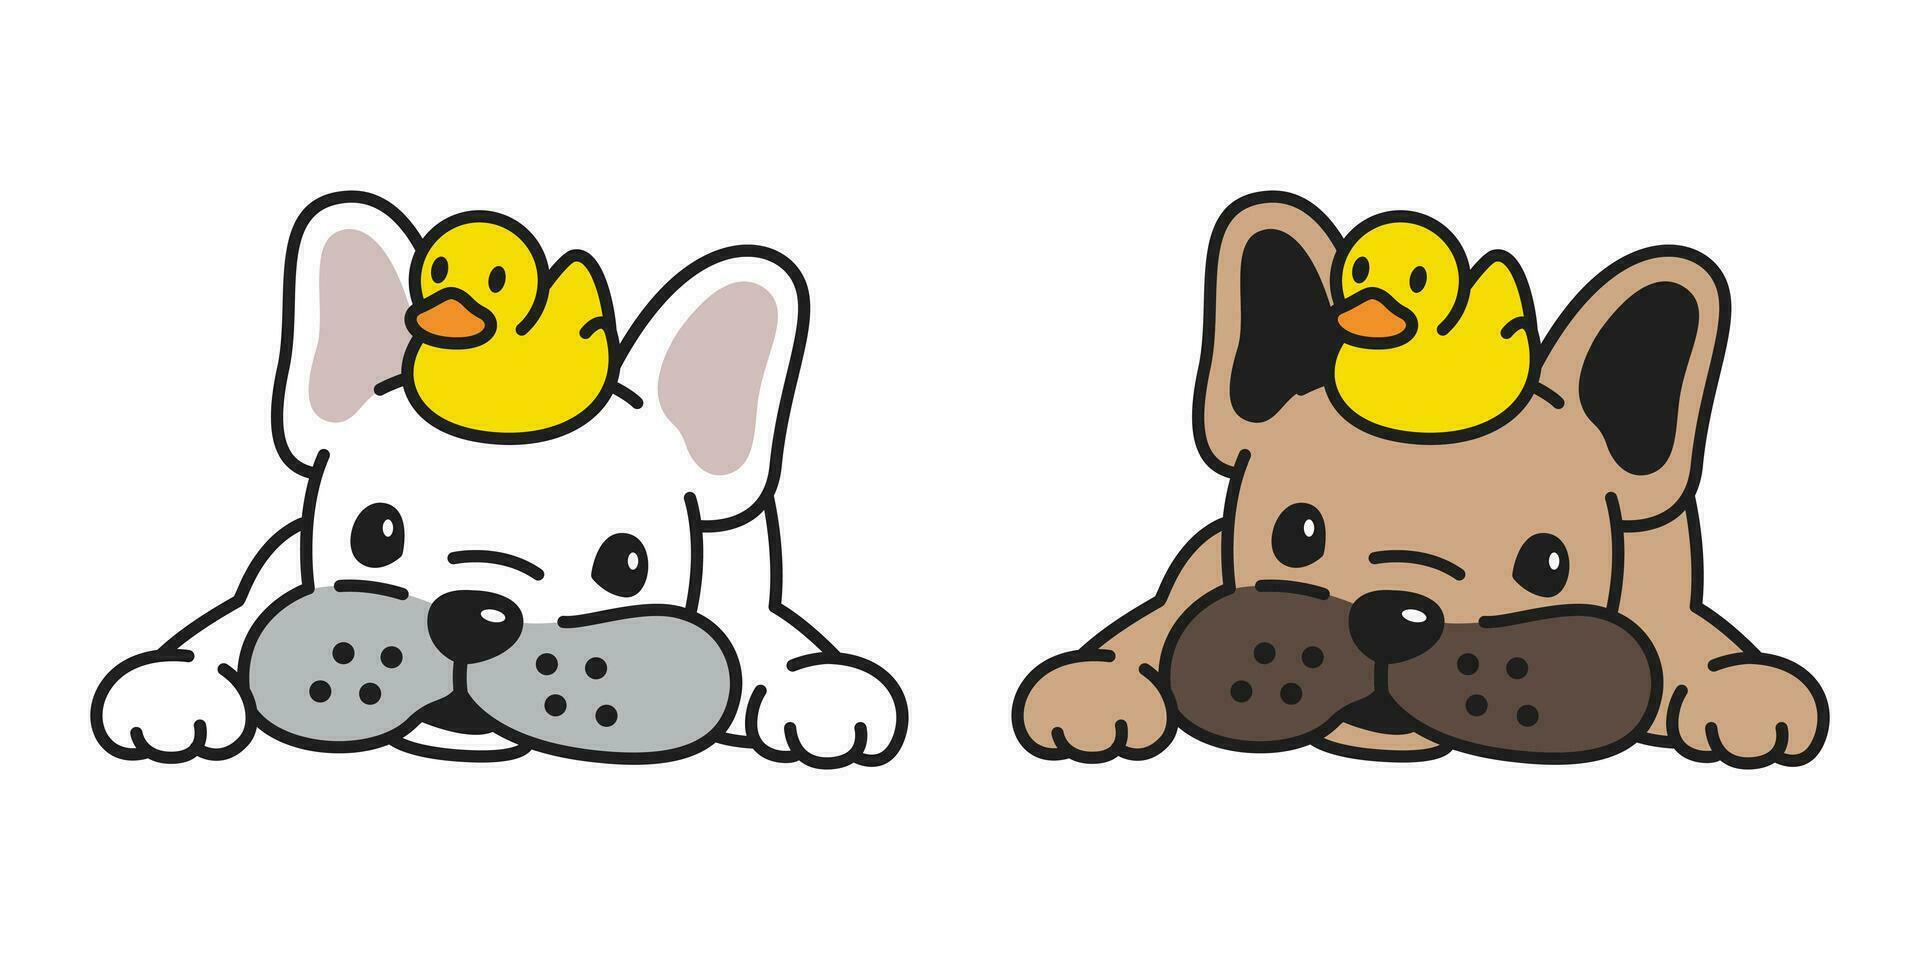 dog vector french bulldog duck rubber icon cartoon character puppy logo illustration doodle